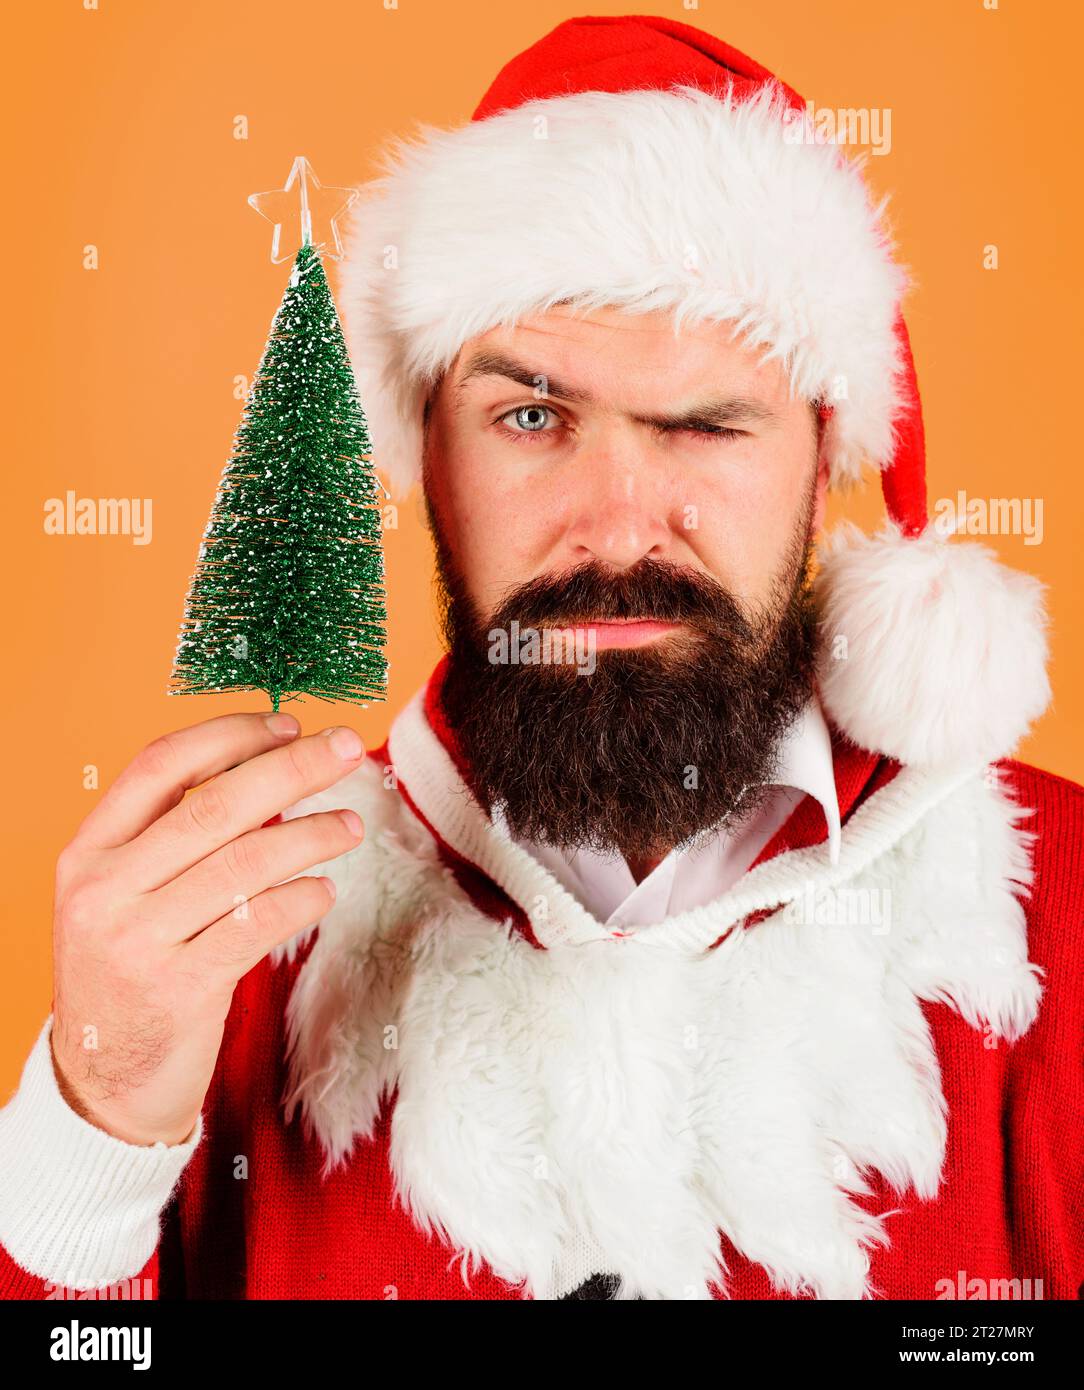 Merry Christmas and Happy New Year. Serious bearded man in Santa costume with small Christmas tree. Christmas, New Year celebration holiday. Santa Stock Photo